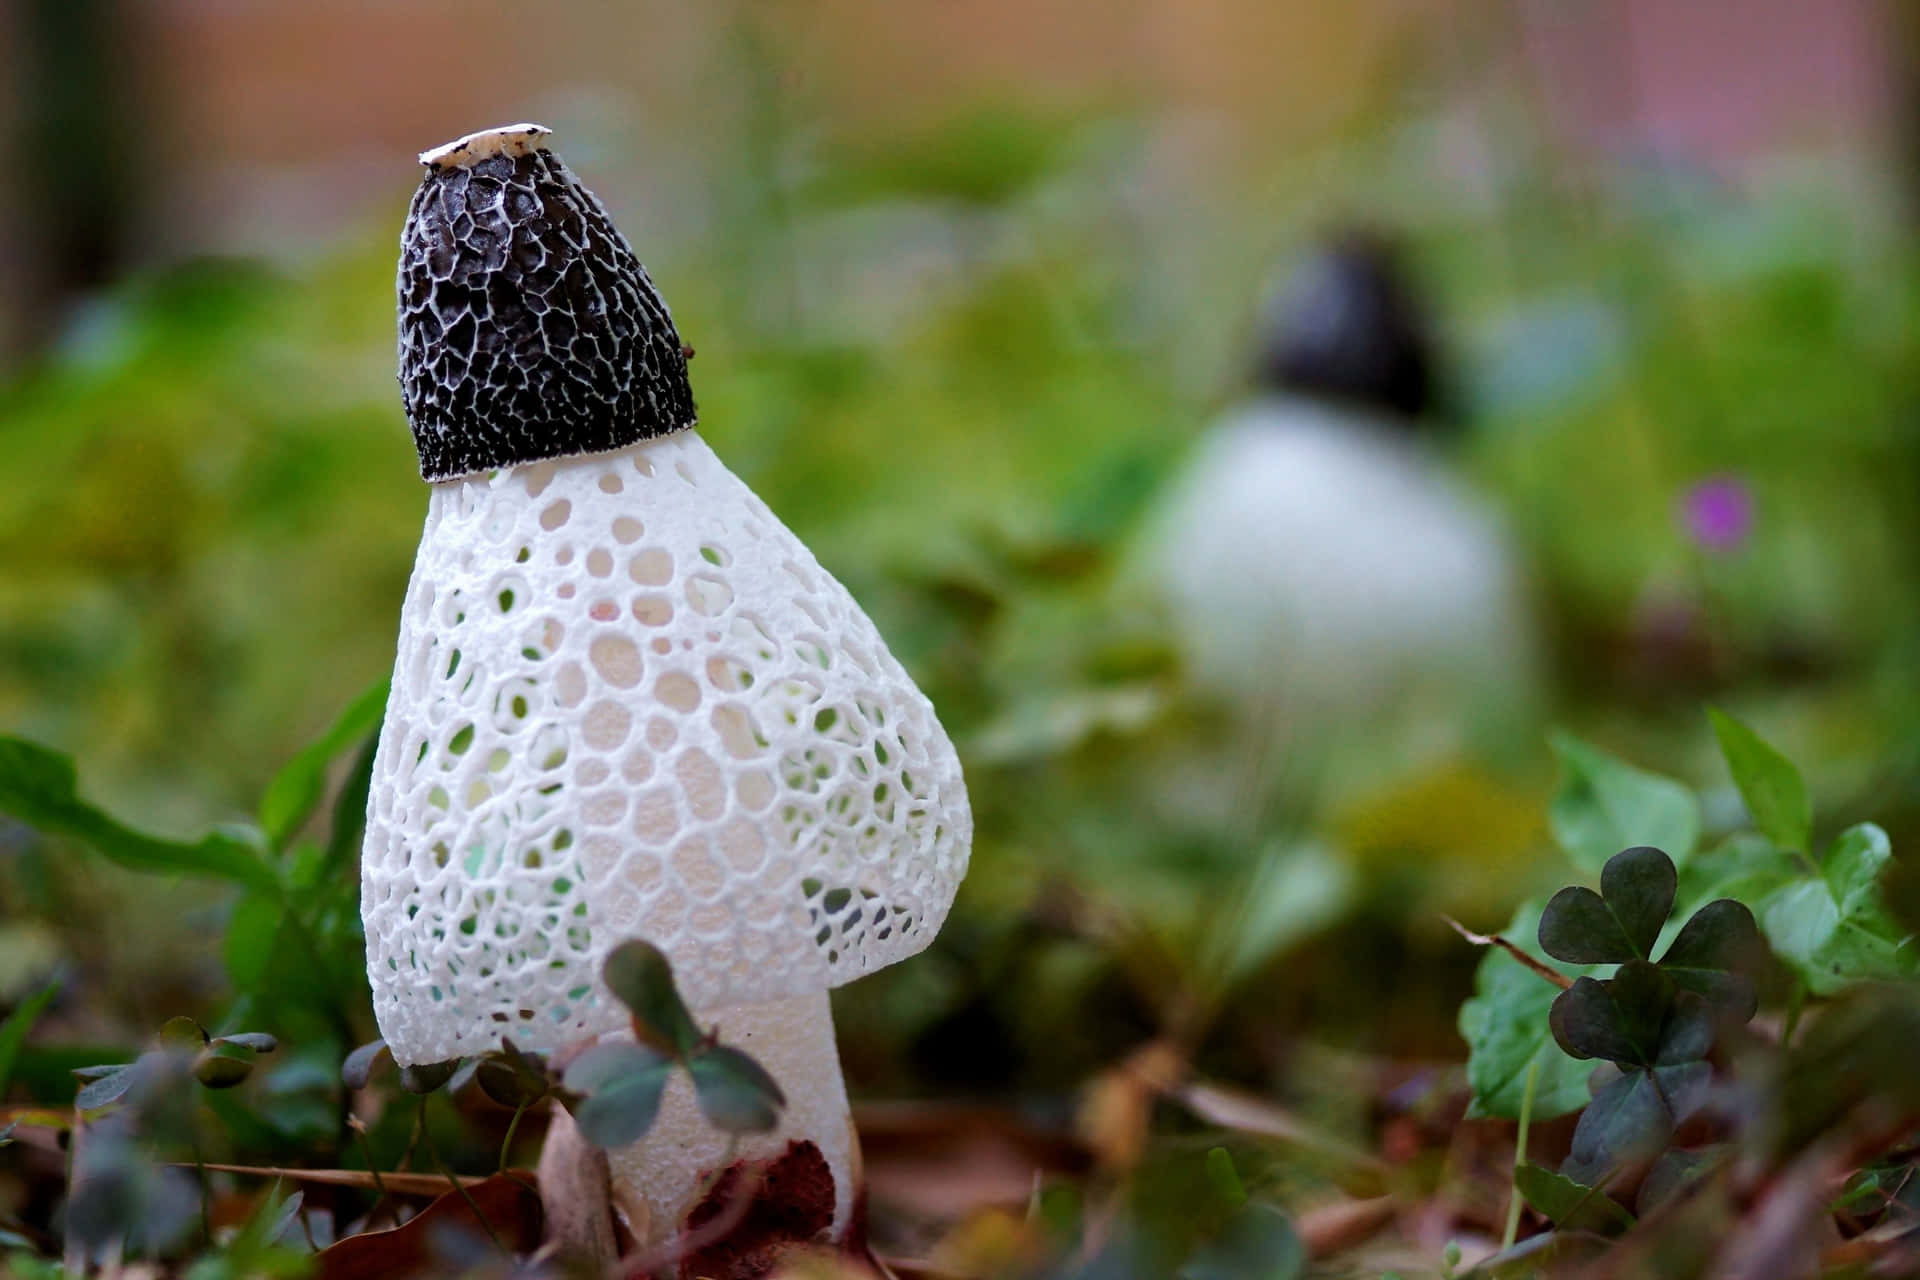 Discover the mysterious Mushroom Forest